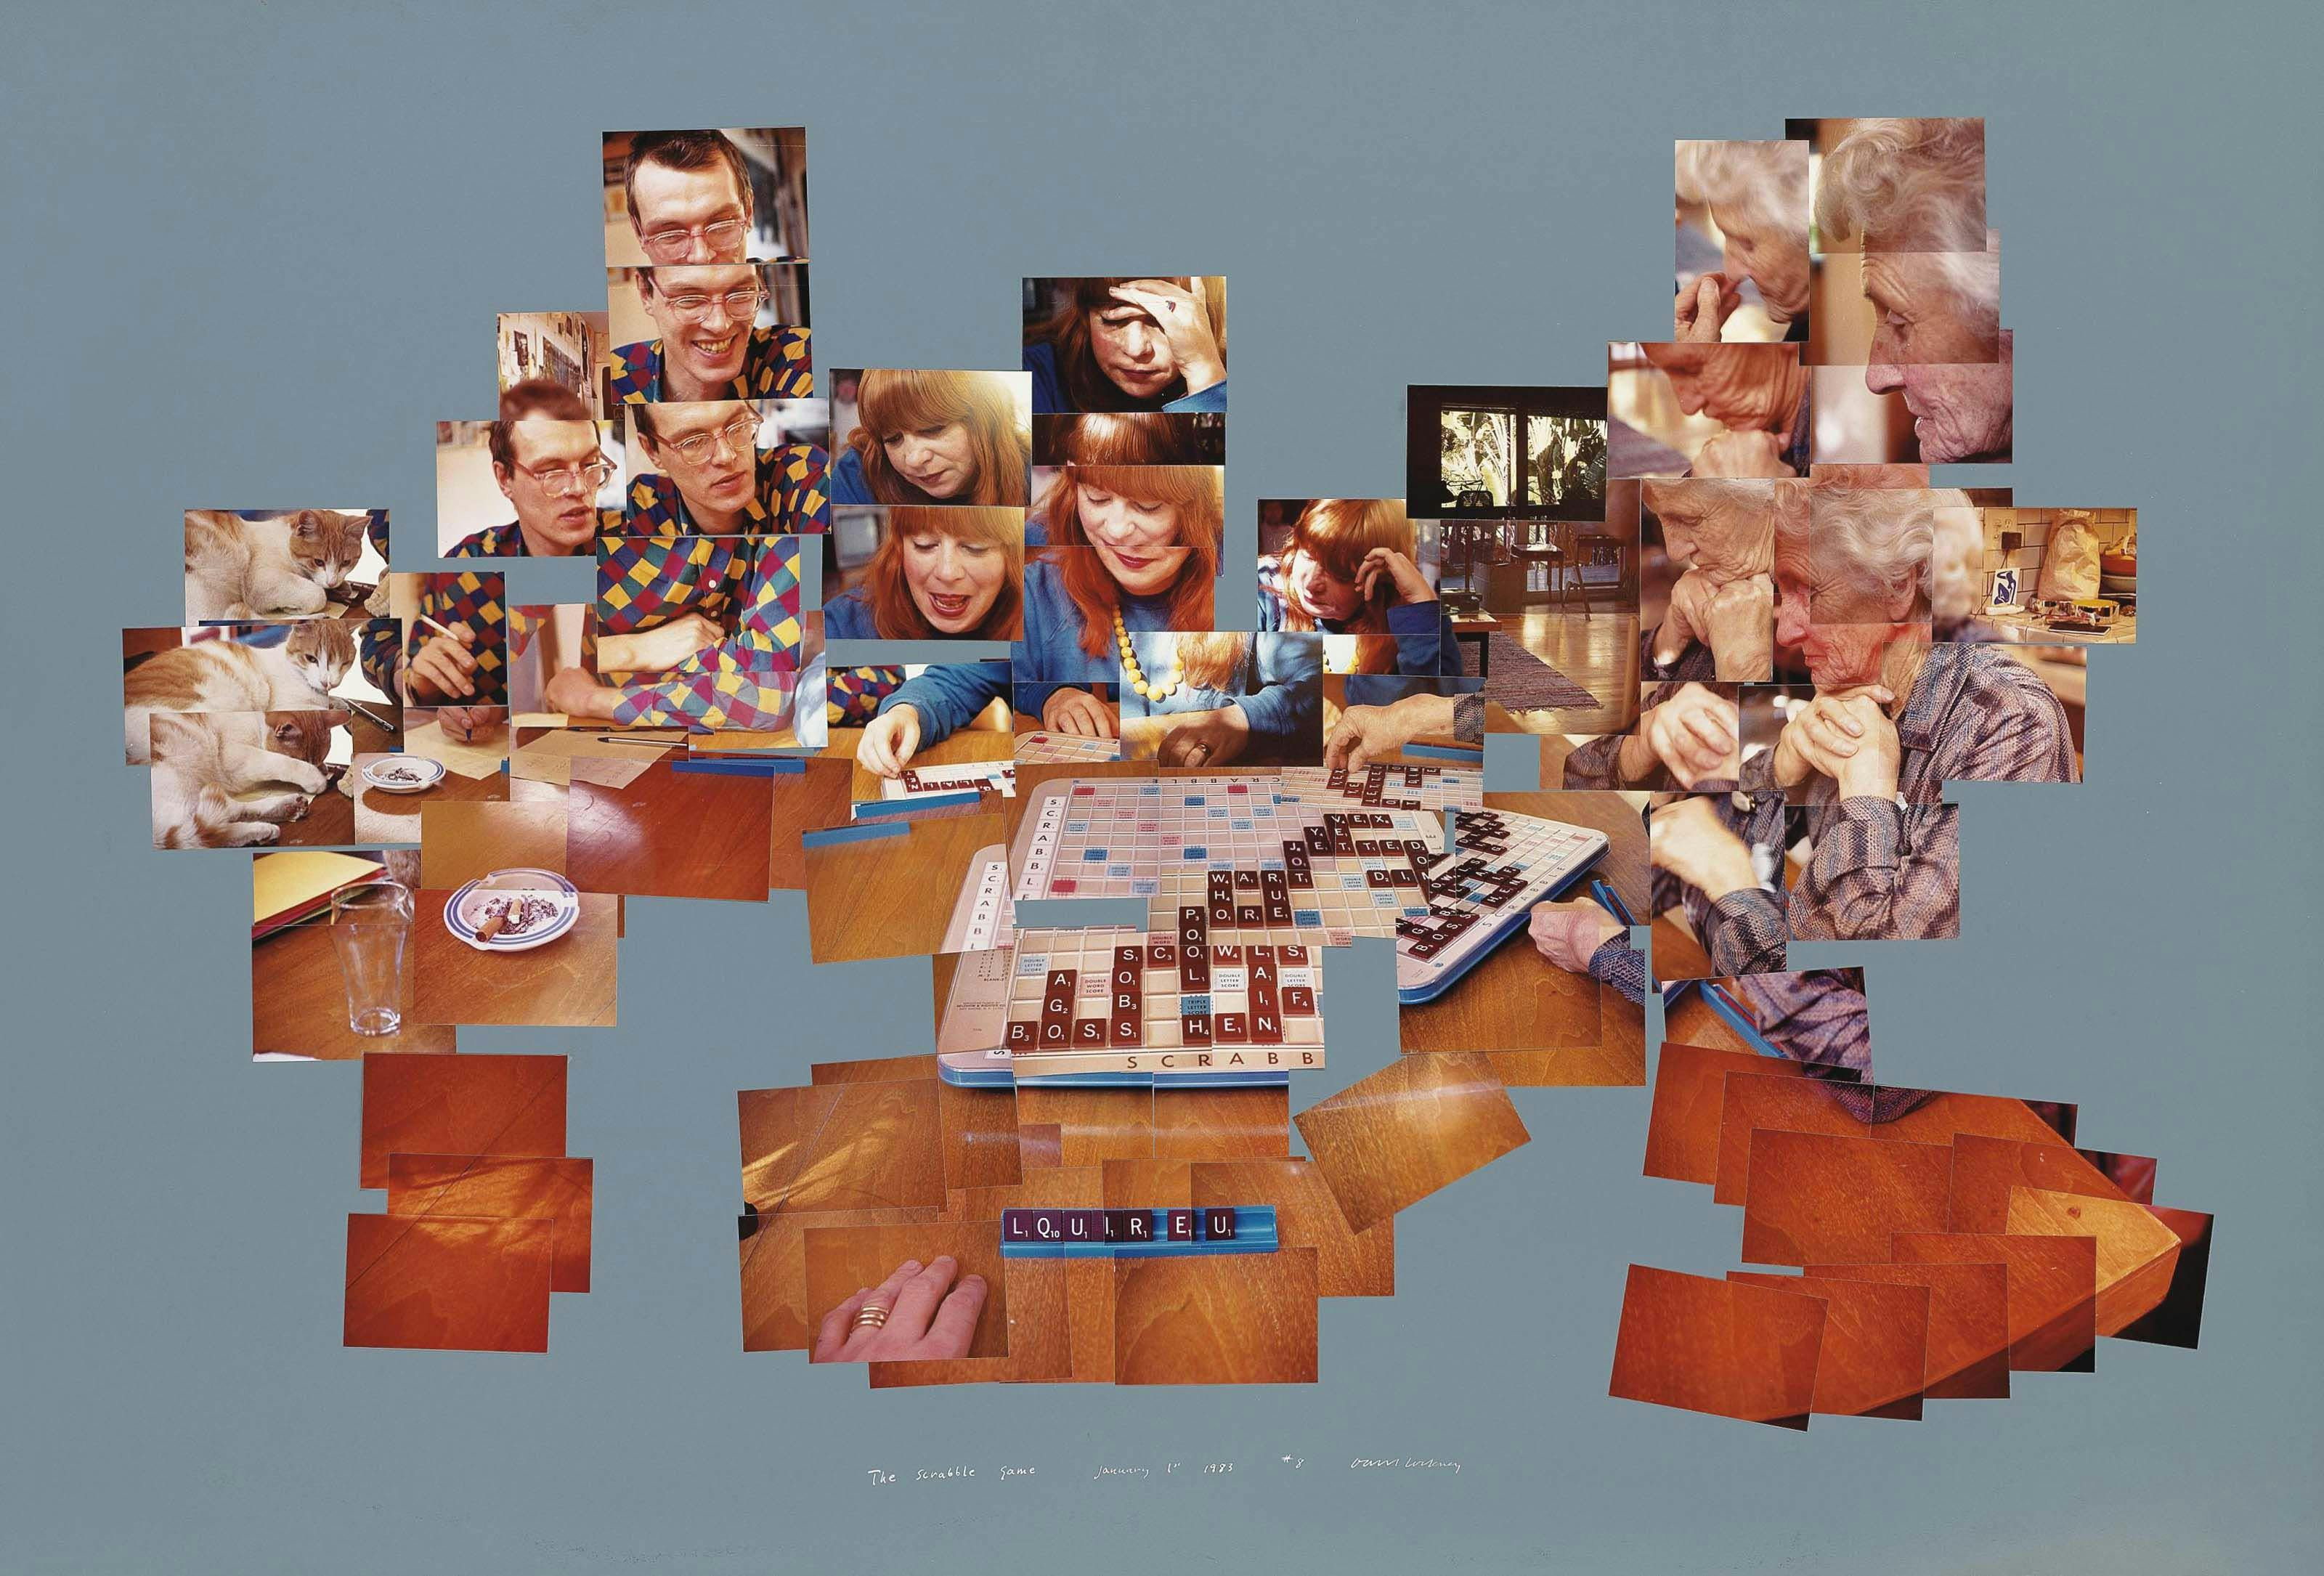 Dozens of individual photographs are stitched together in a collage. Together, the photographs depict the scene of a game of Scrabble. There's a white-and-orange cat on the left of the scene. A man with glasses is seen smiling and looking at the game. In the middle is a red-haired woman, looking happily and pensively at her Scrabble tiles. On the right is an elderly woman, her hands held beneath her chin, looking thoughtfully at the game board.